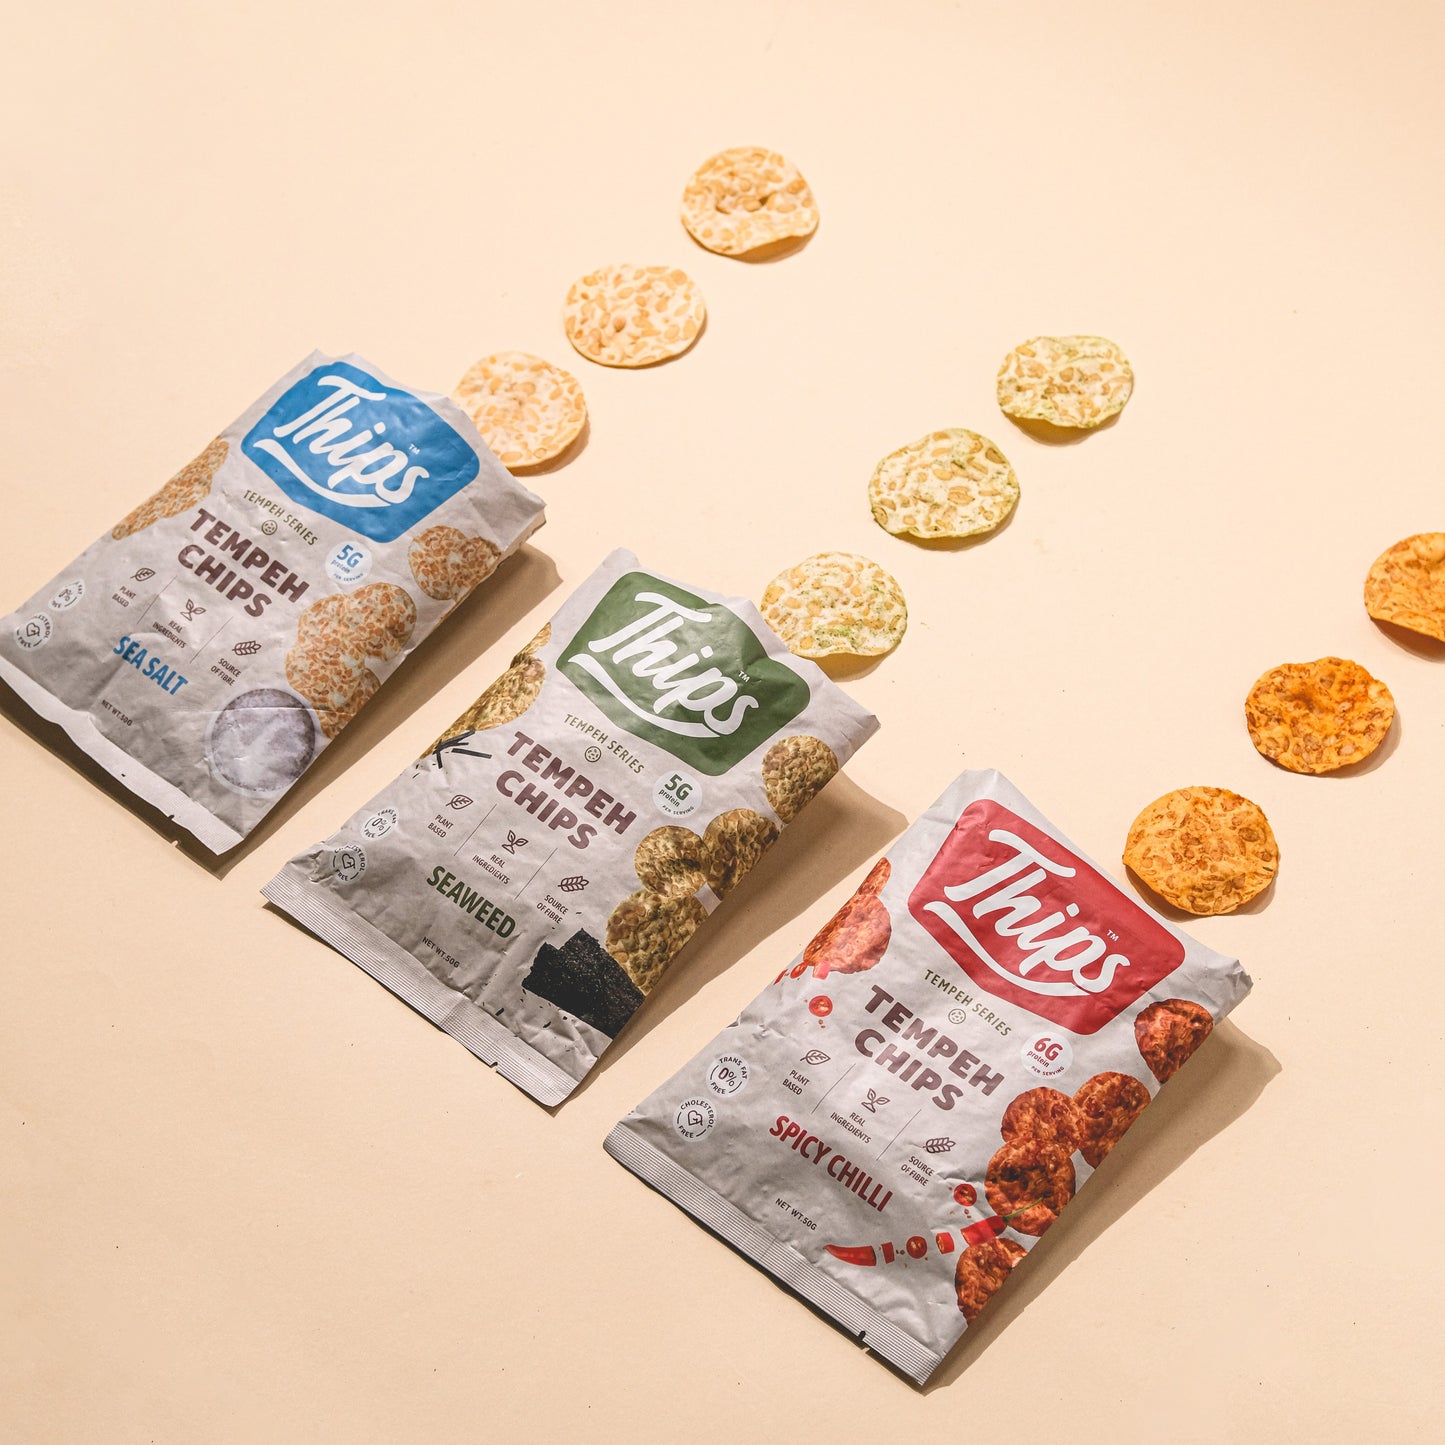 [Subscription Plan- Bundle of 24] Thips Variety Flavor Tempeh Chips